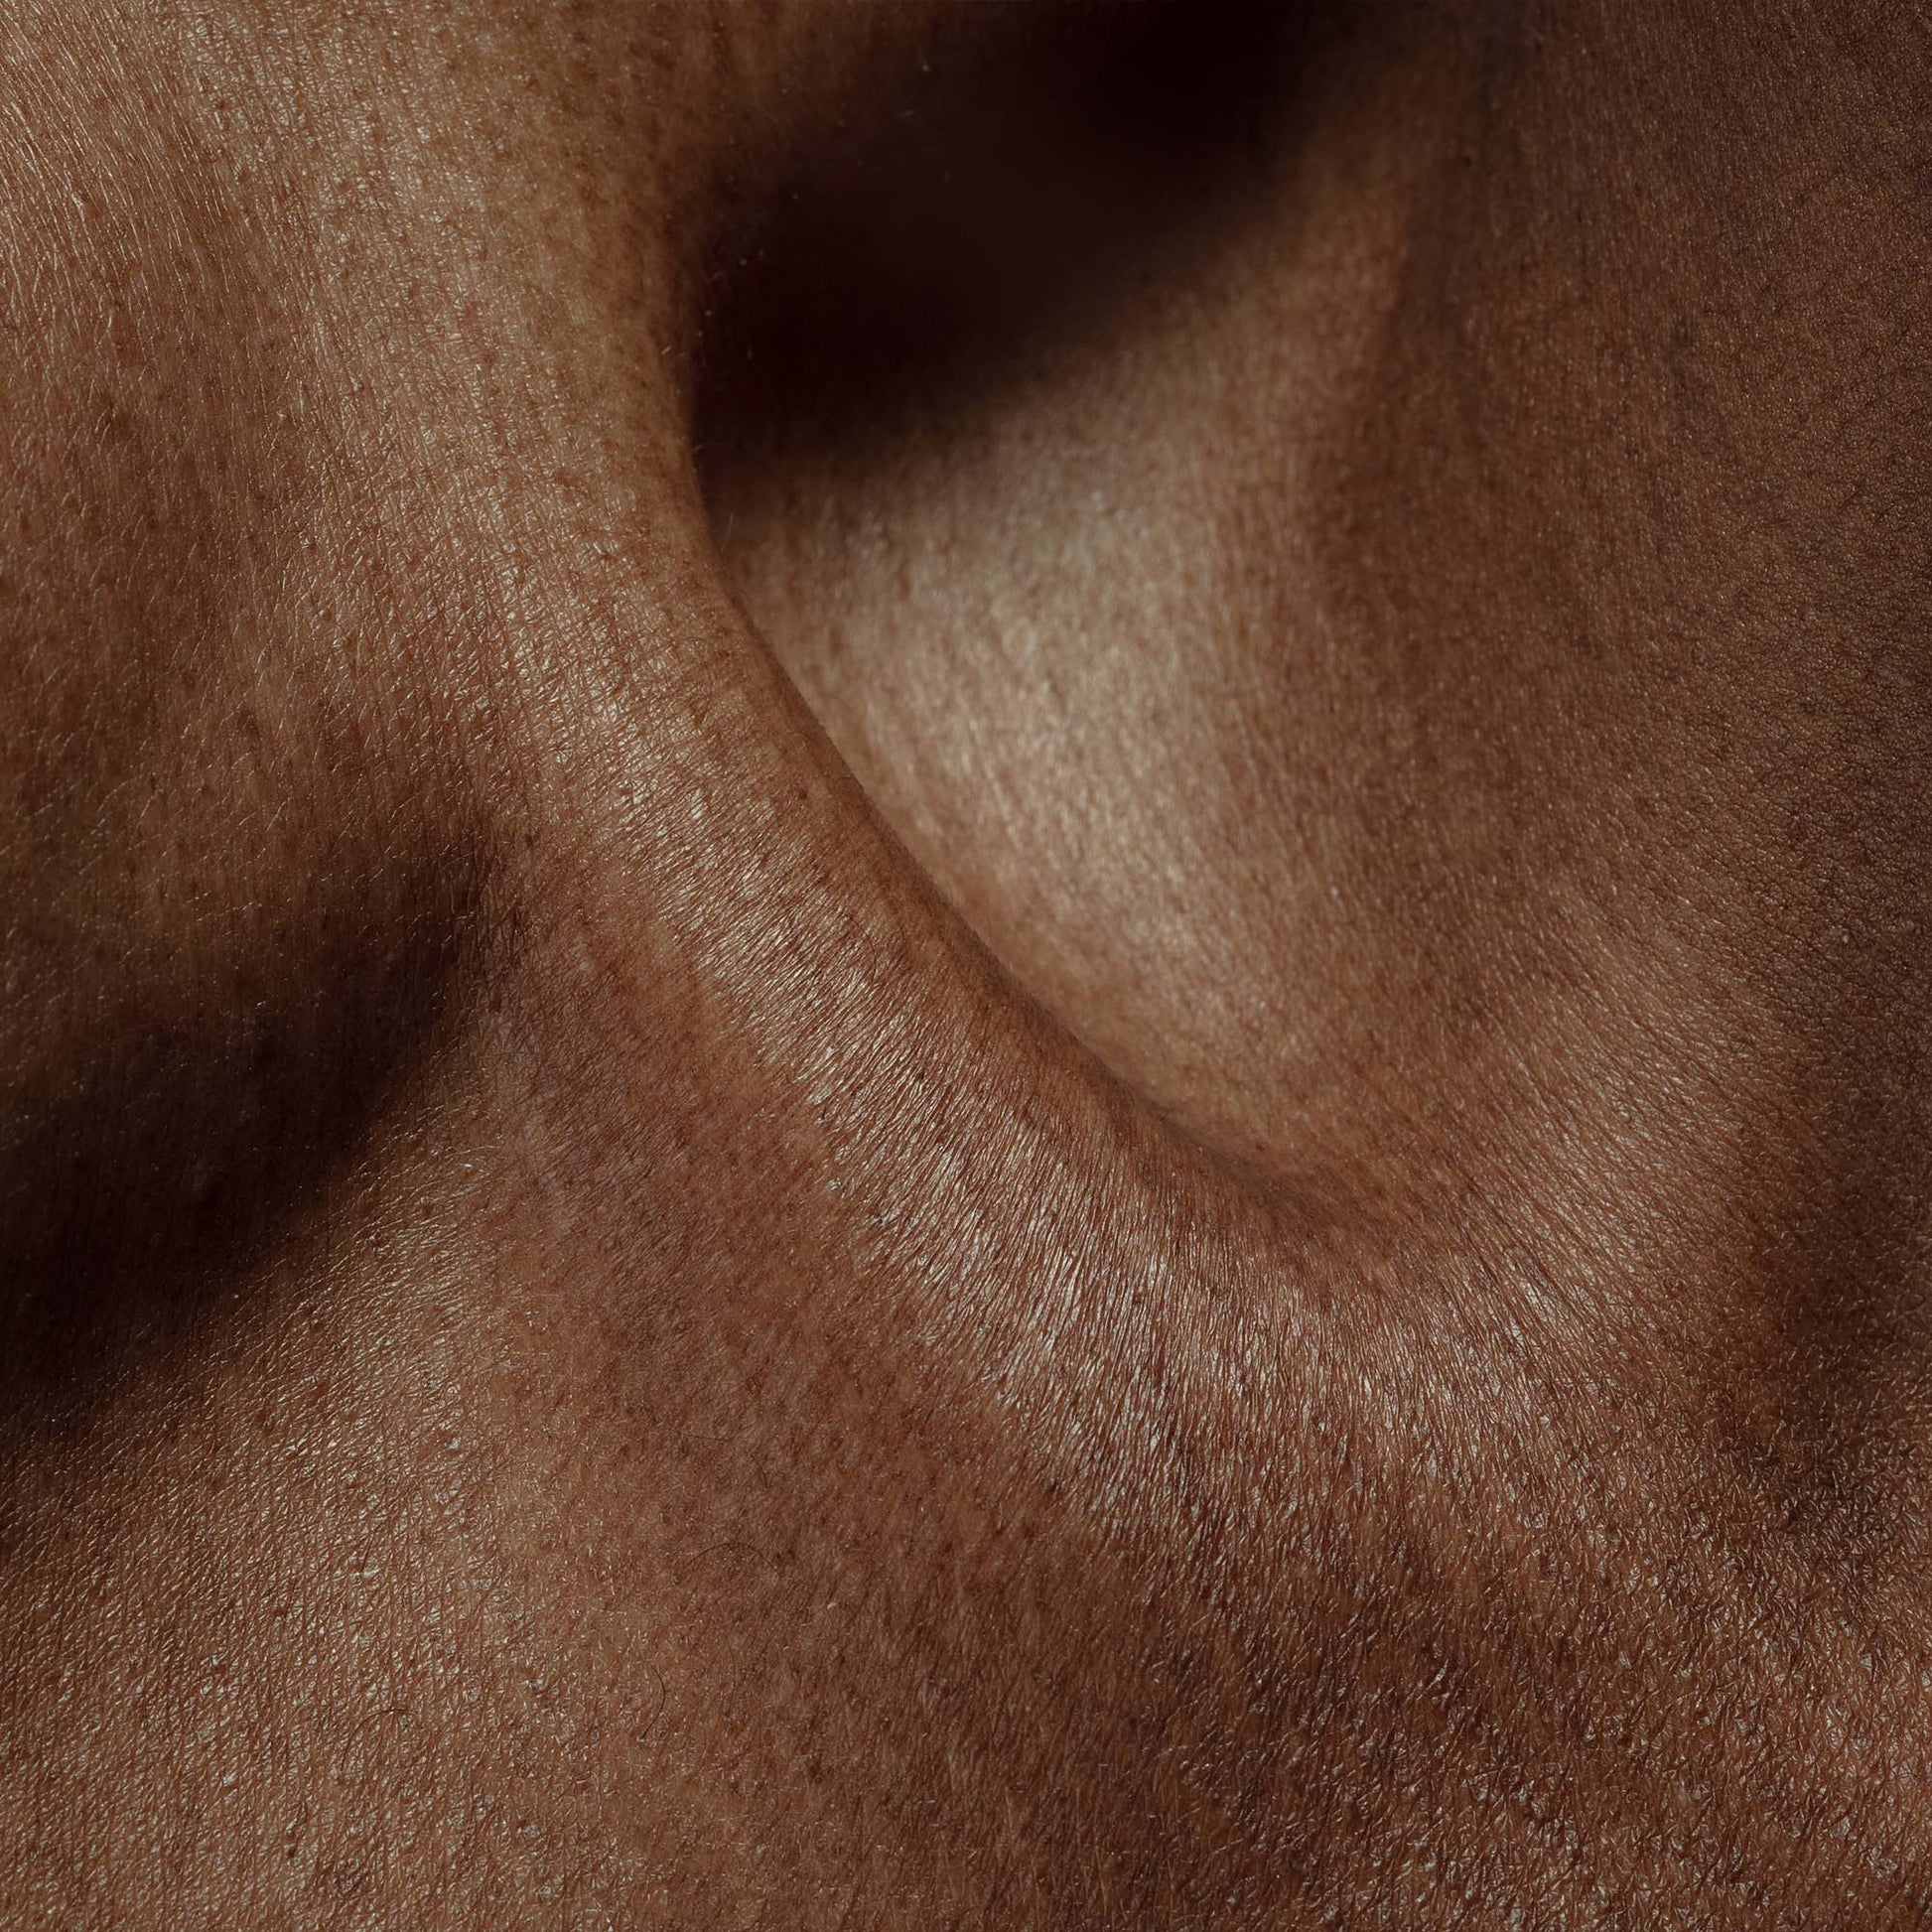 close up of skin texture